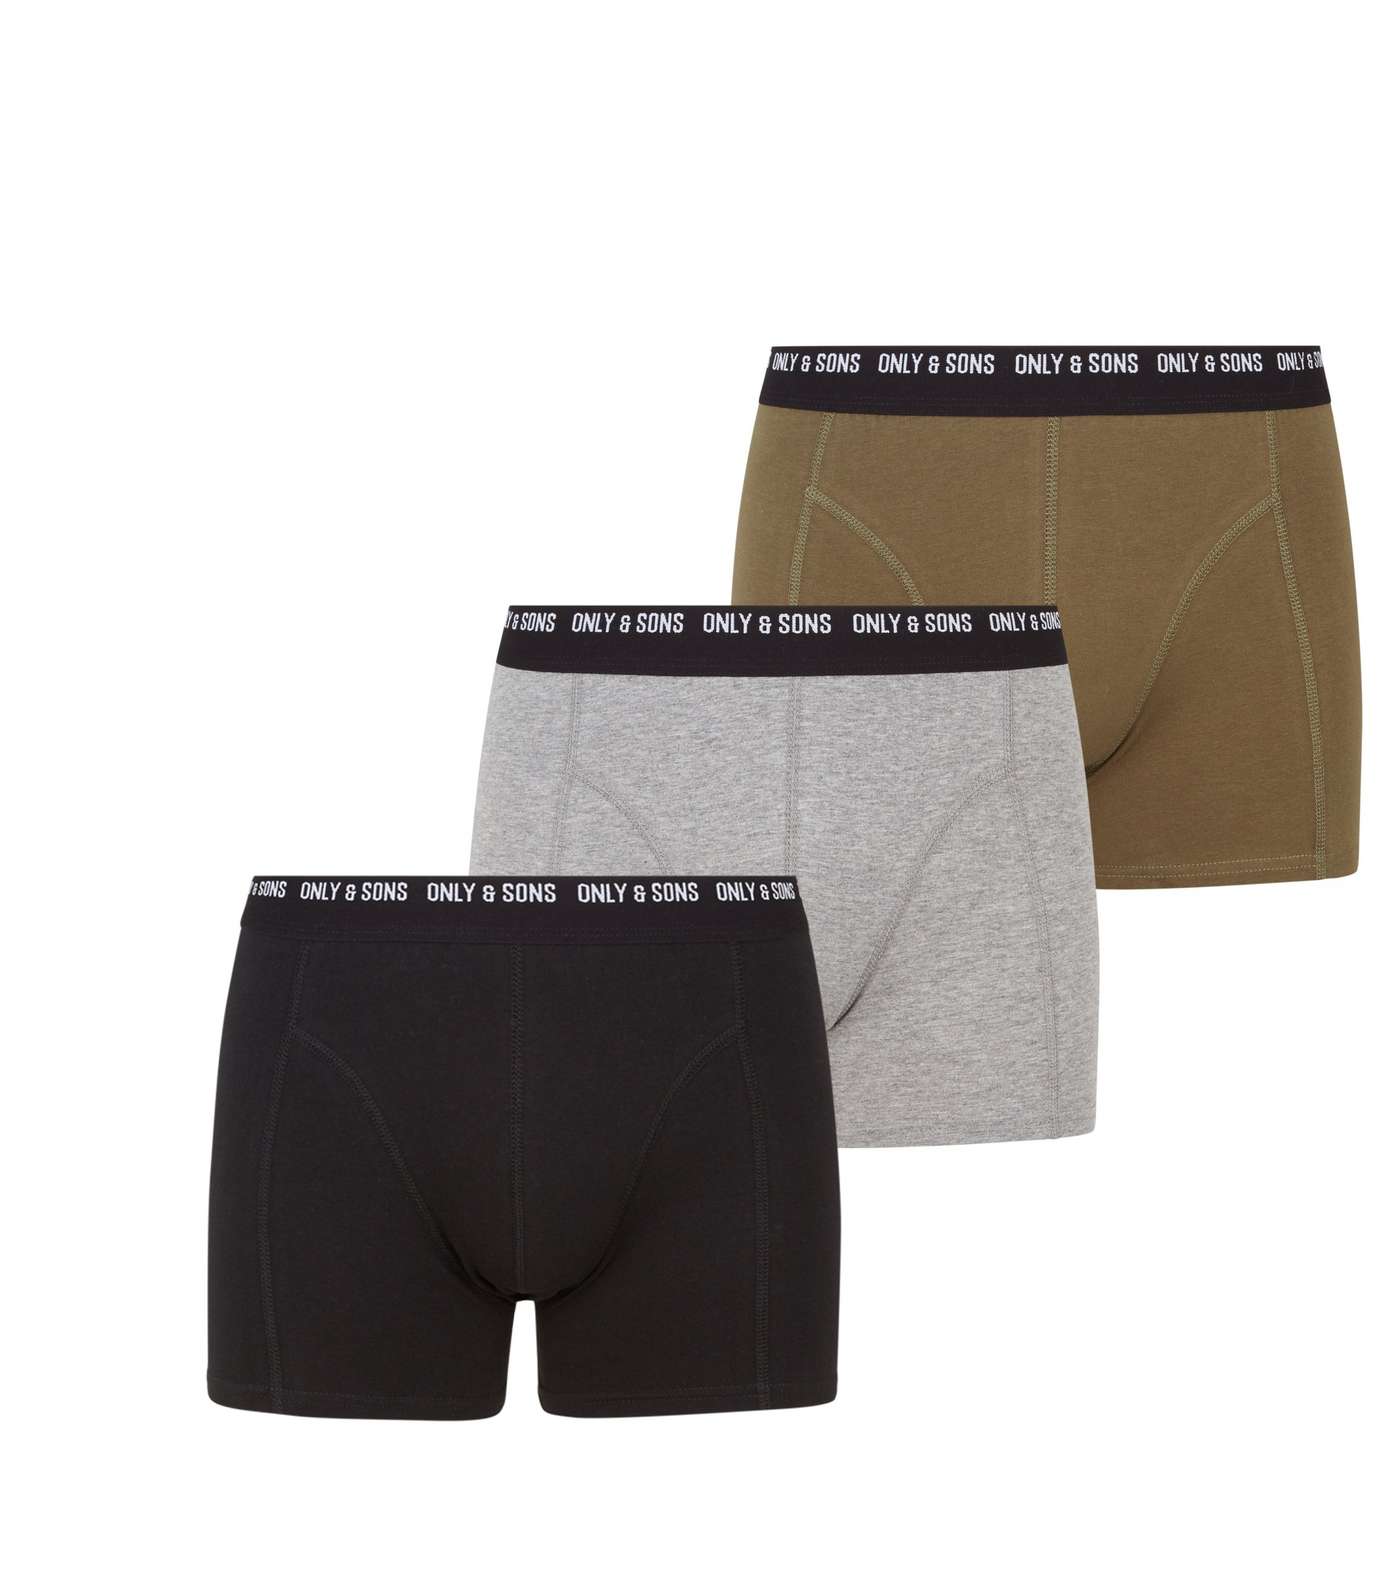 Only & Sons 3 Pack Khaki Boxers Image 2